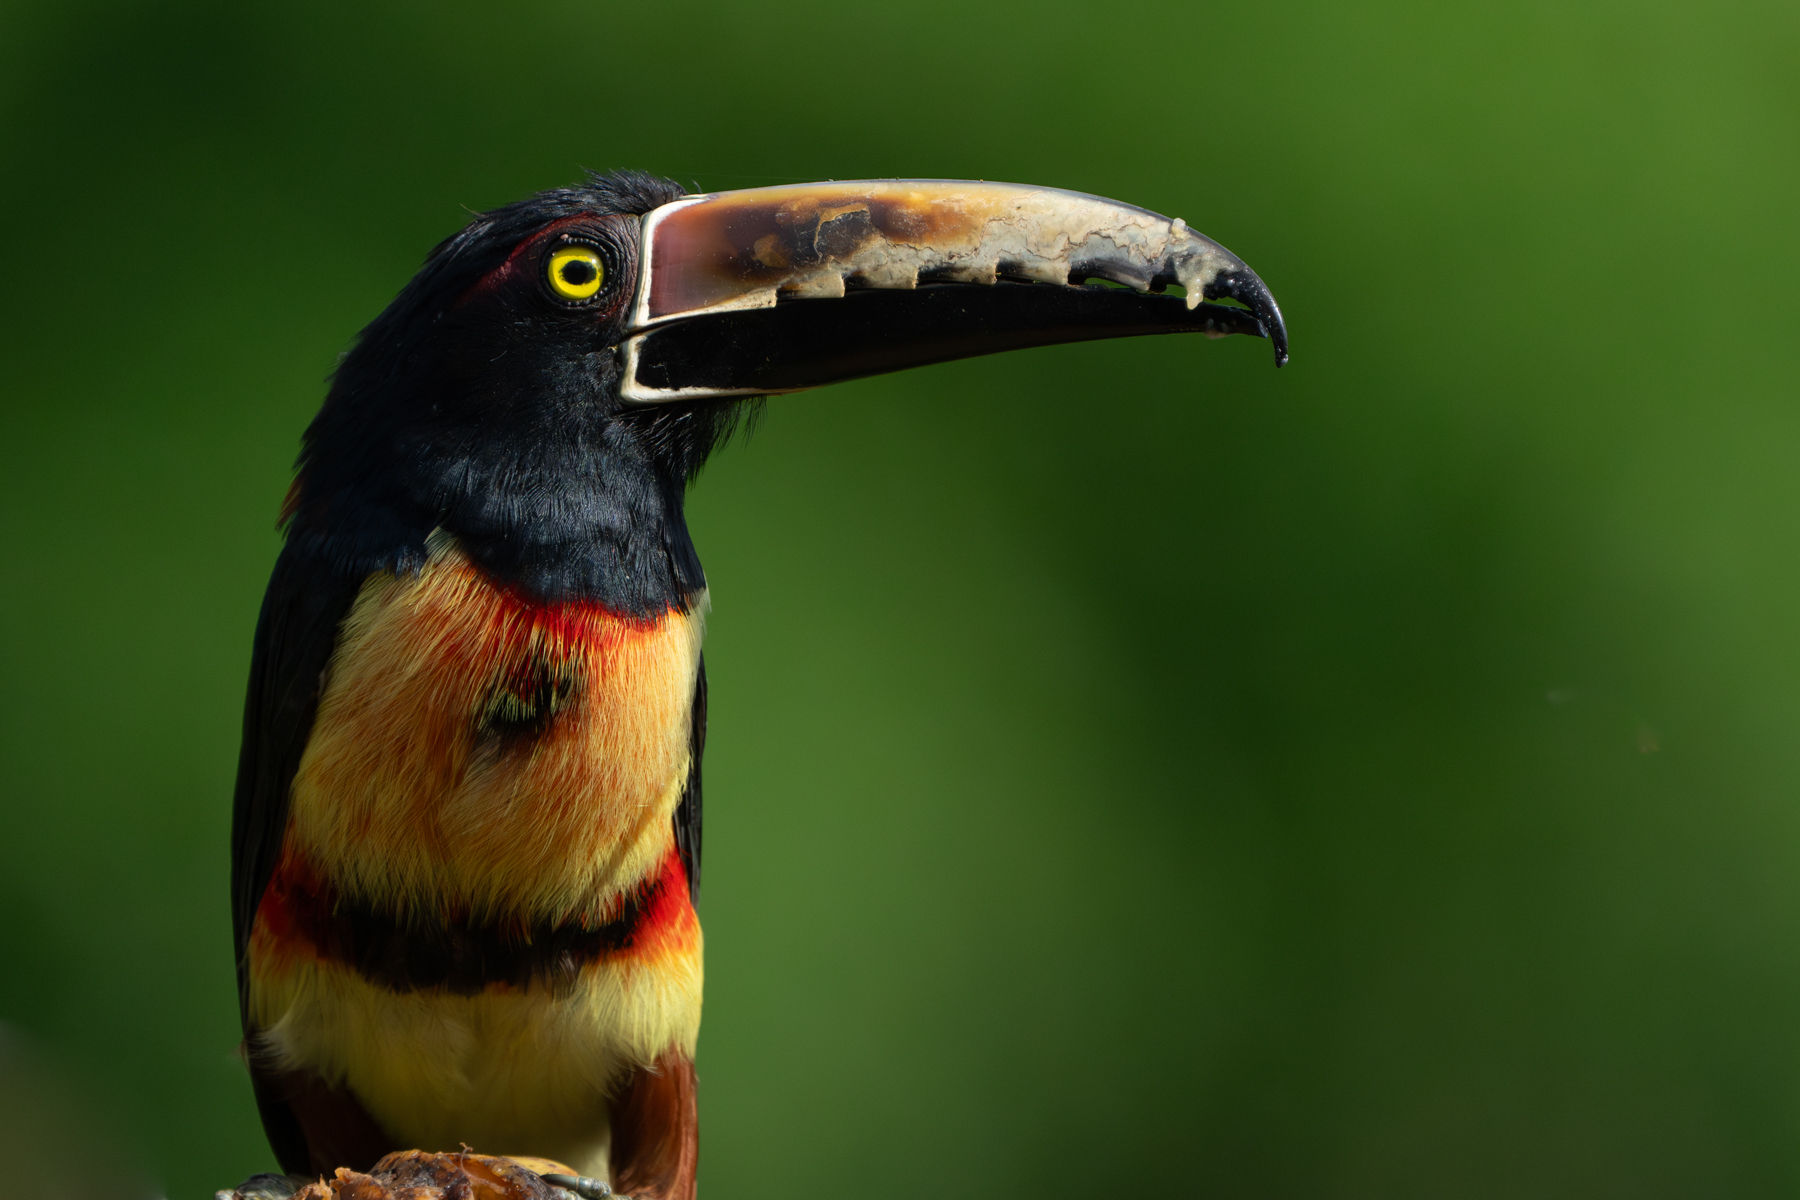 Portrait of a Collared Aracari. Look at that serrated bill! (image by Inger Vandyke)